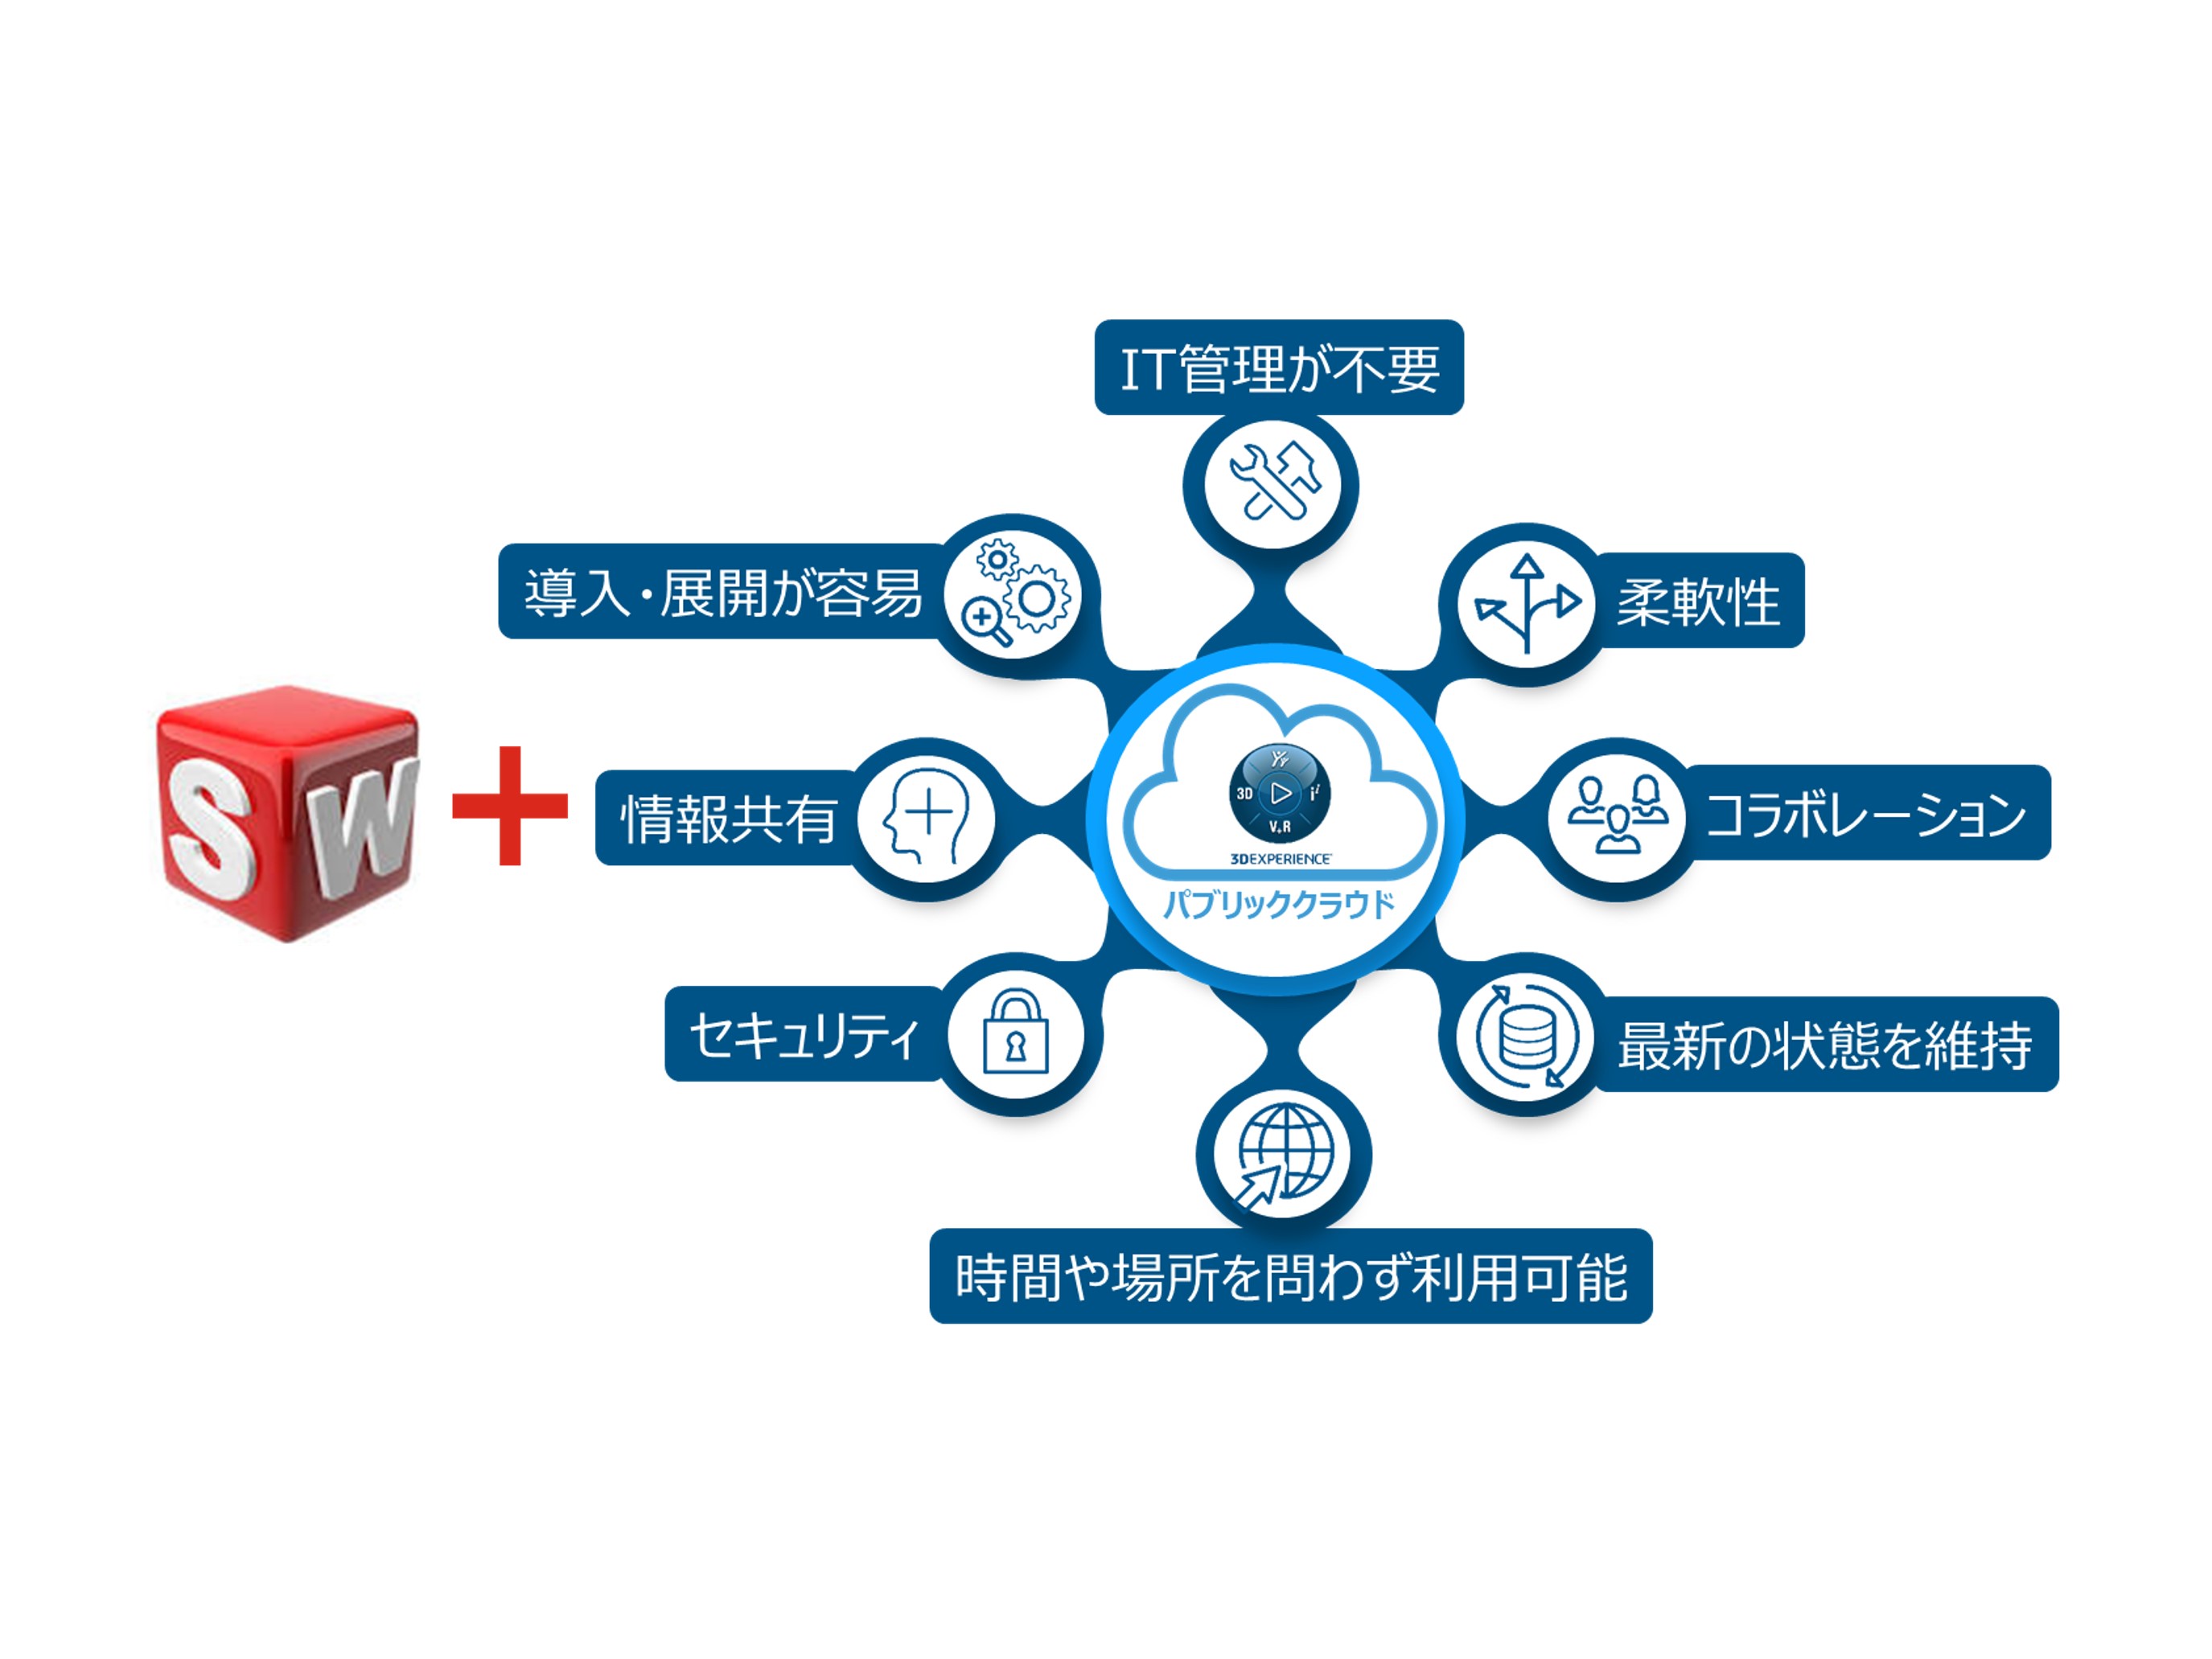 3DEXPERIENCE SOLIDWORKSのメリット